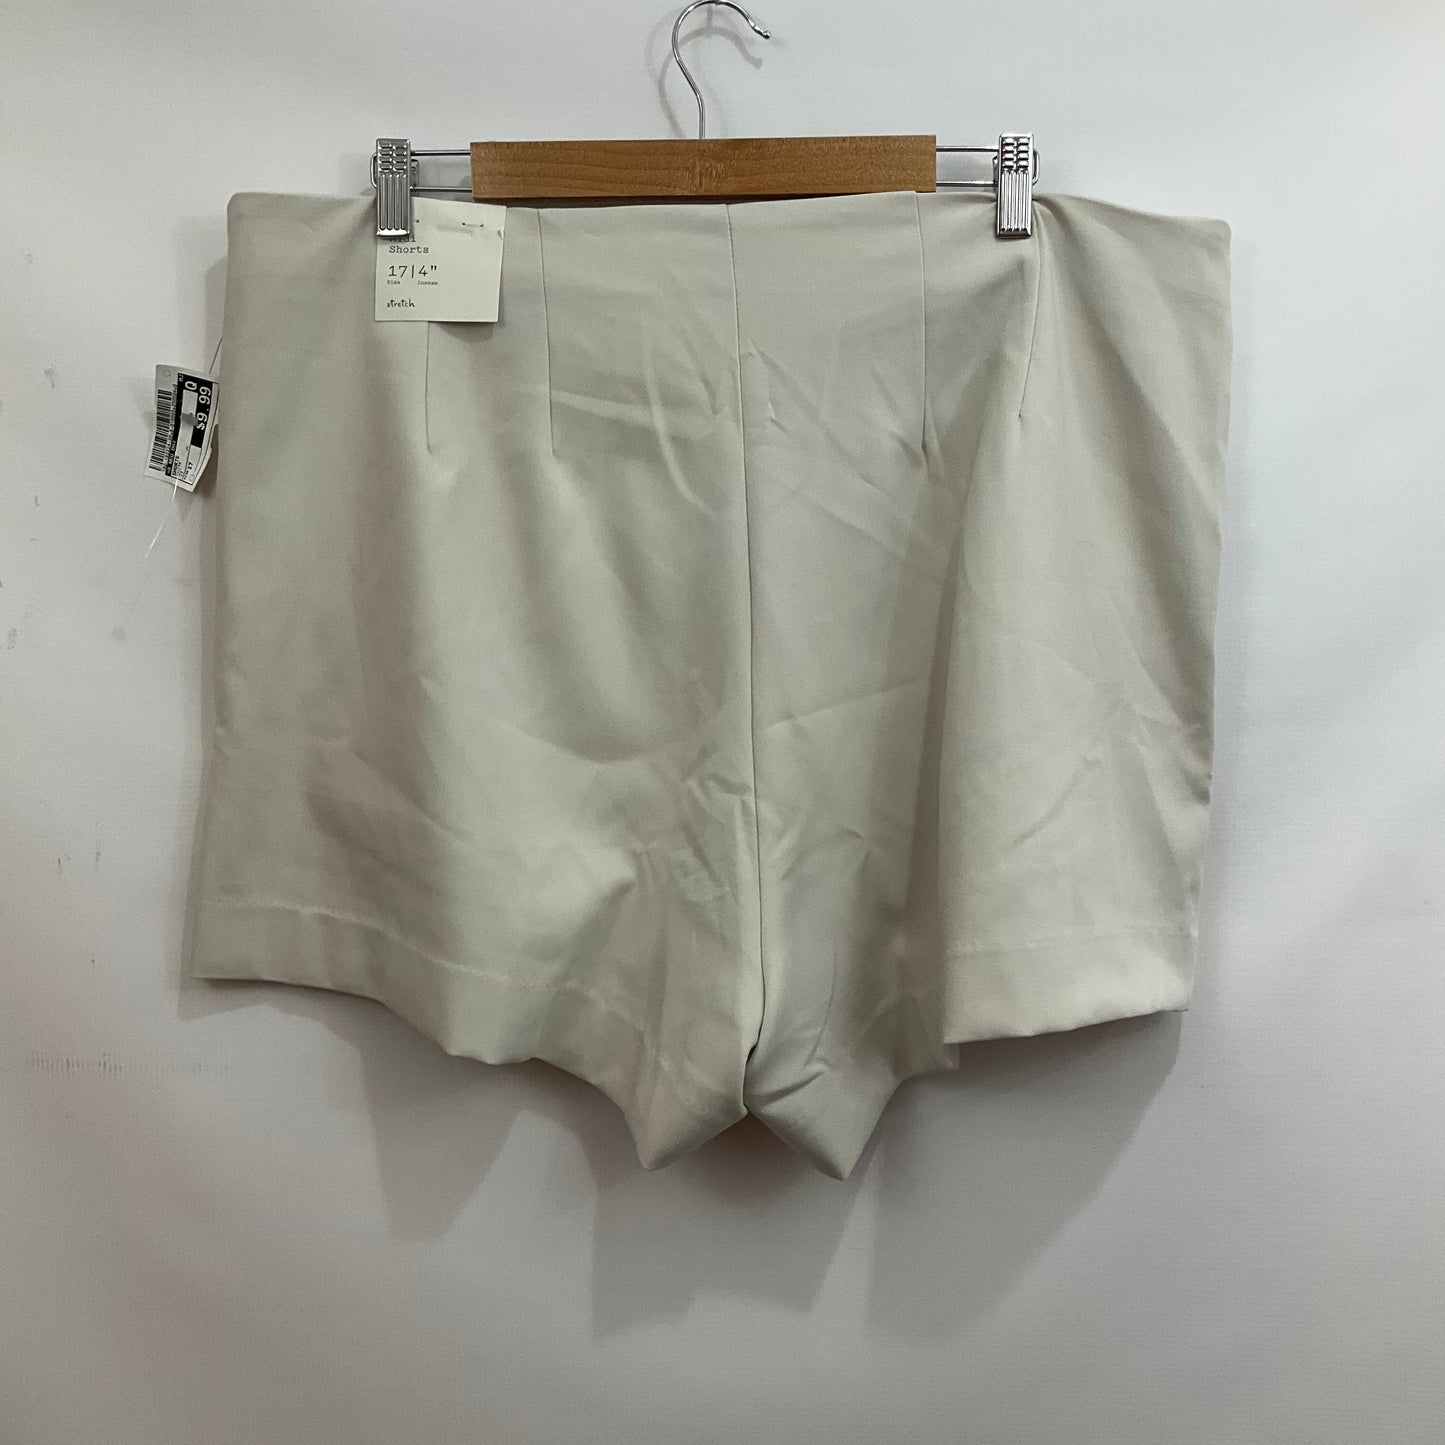 Shorts By A New Day  Size: 17